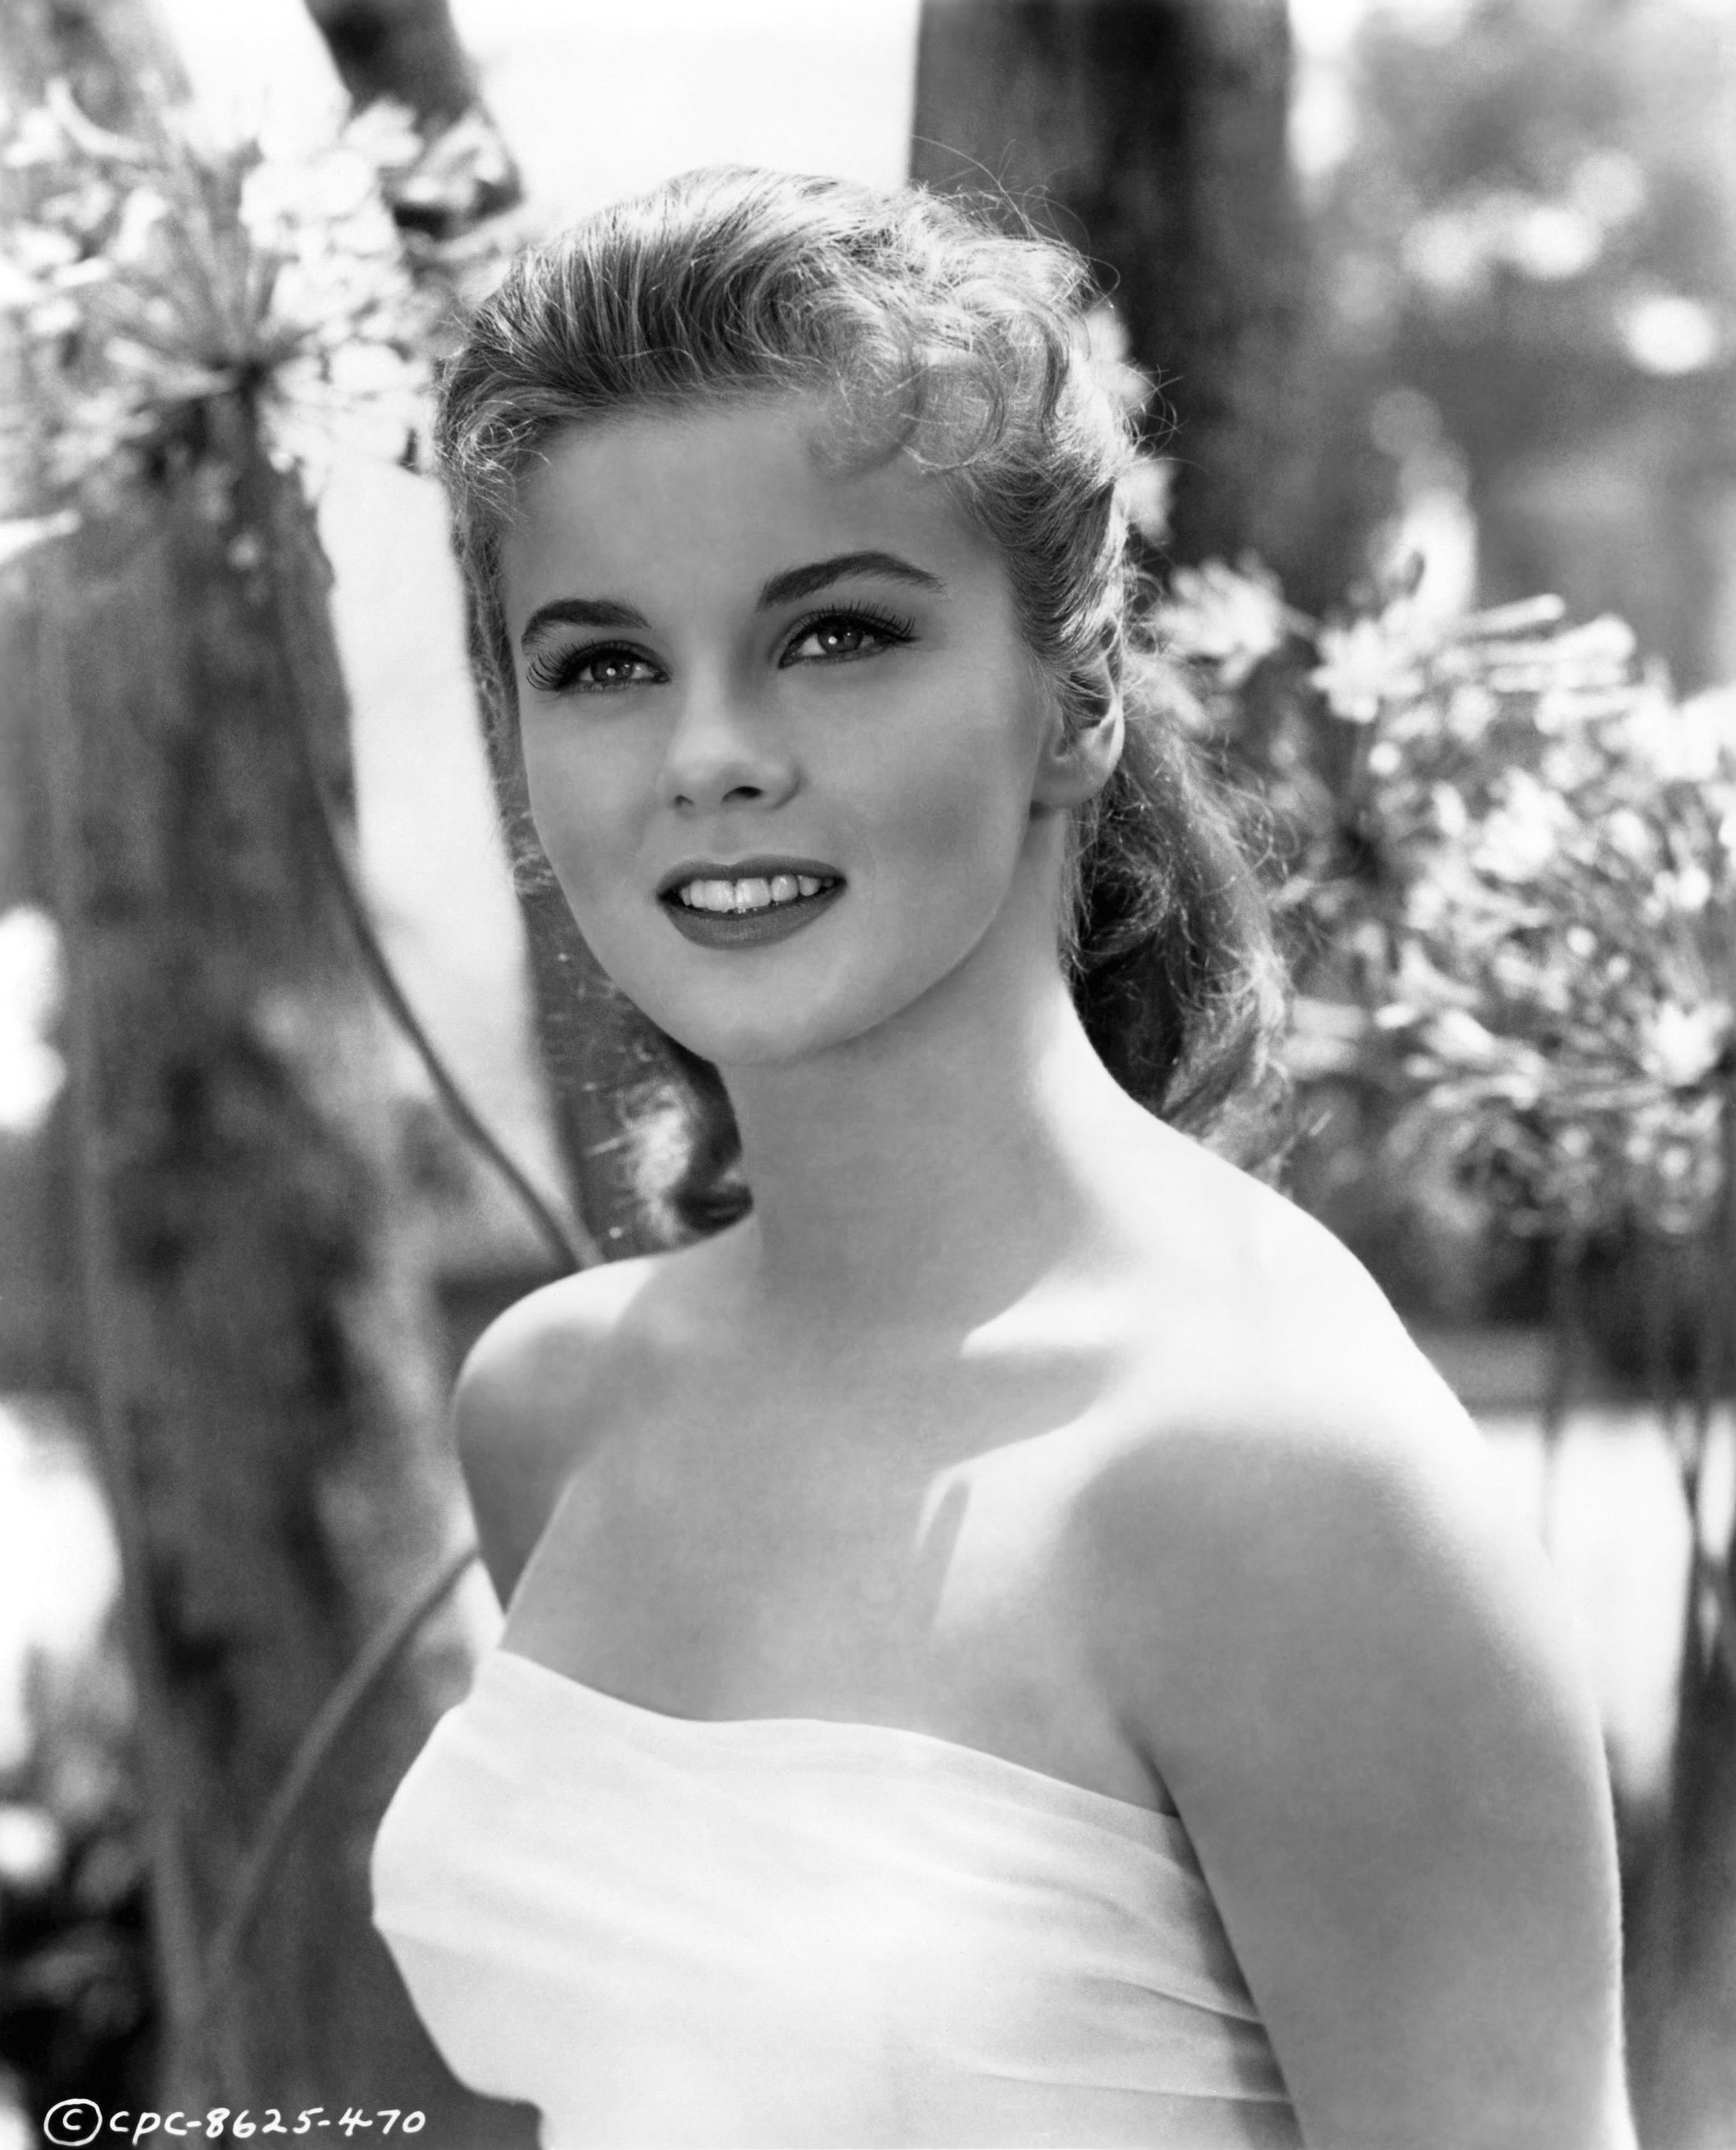 Ann-Margret: movie debut in A Pocketful of Miracles (1961) at age 19 ...